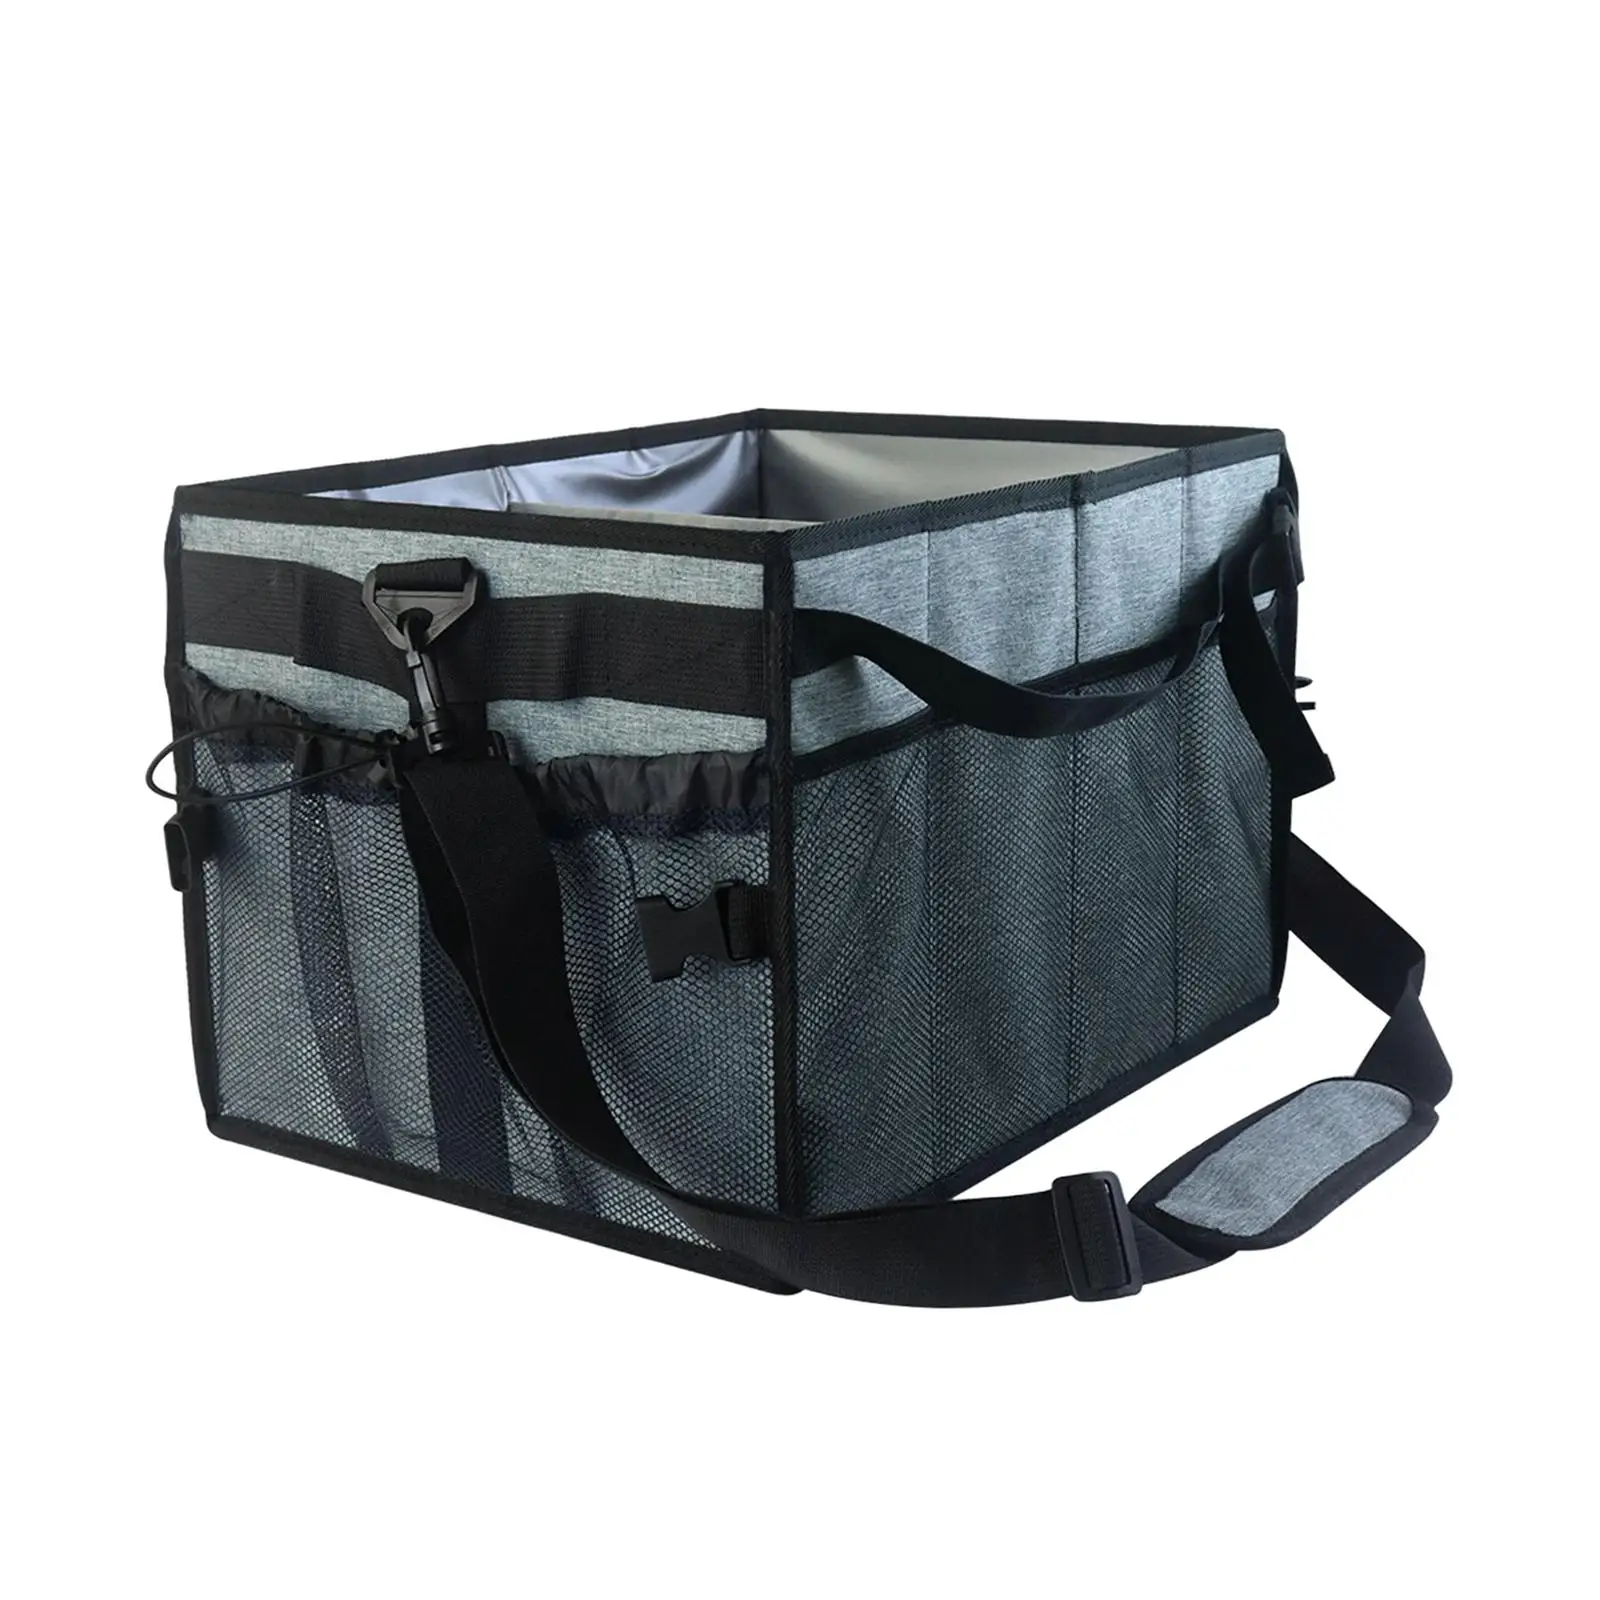 Outdoor Camping Storage Bag Waterproof with Handle Seasoning Bottle Holder Grill Tool Carrying Bag for Outdoor Backpacking Trip